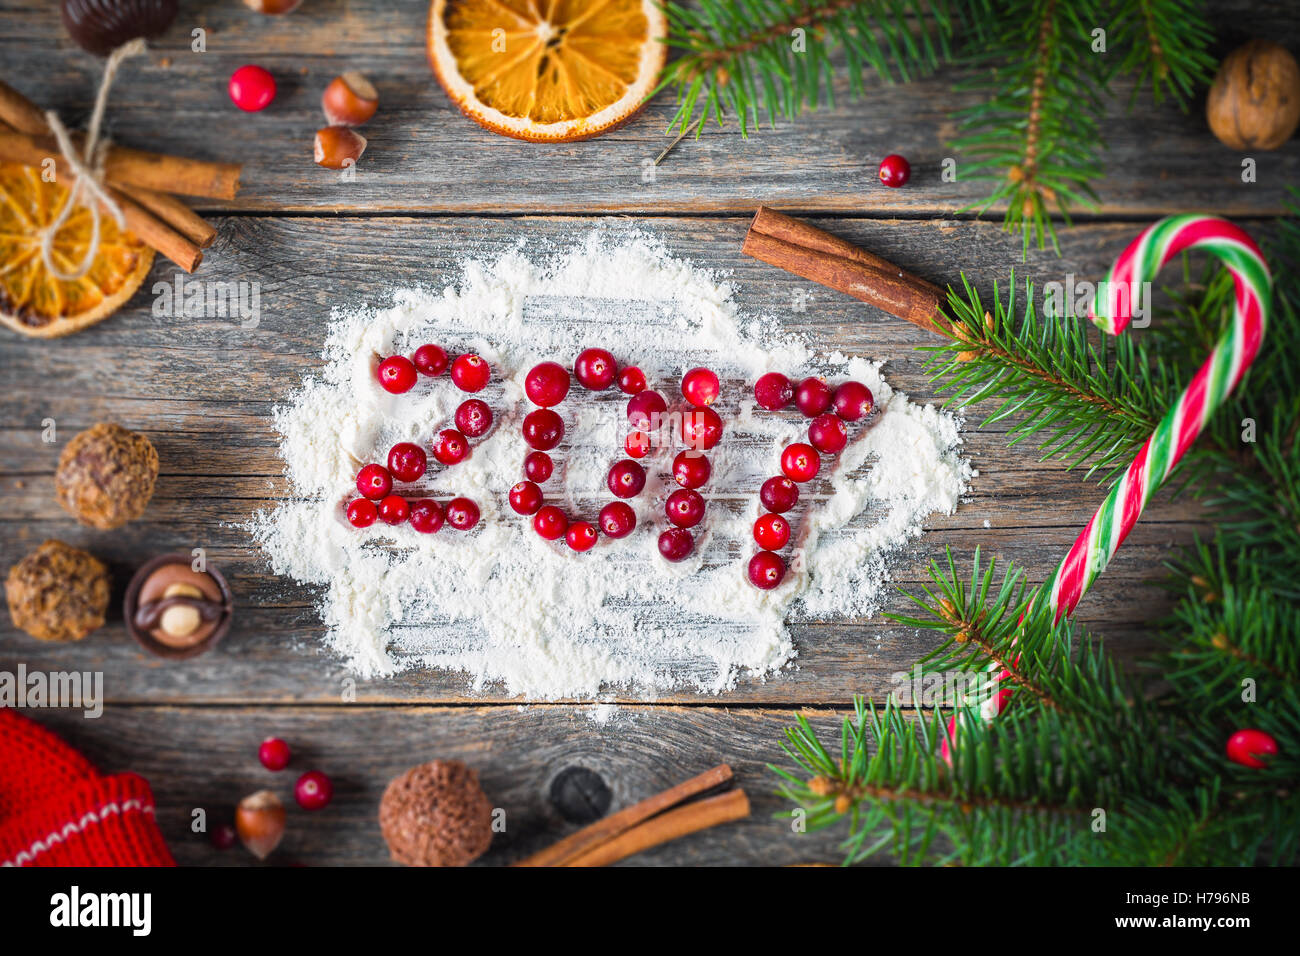 Happy New Year 2017 card ! Various candies, dried fruits, spices, fir tree and cranberries on wooden background with 2017 Stock Photo